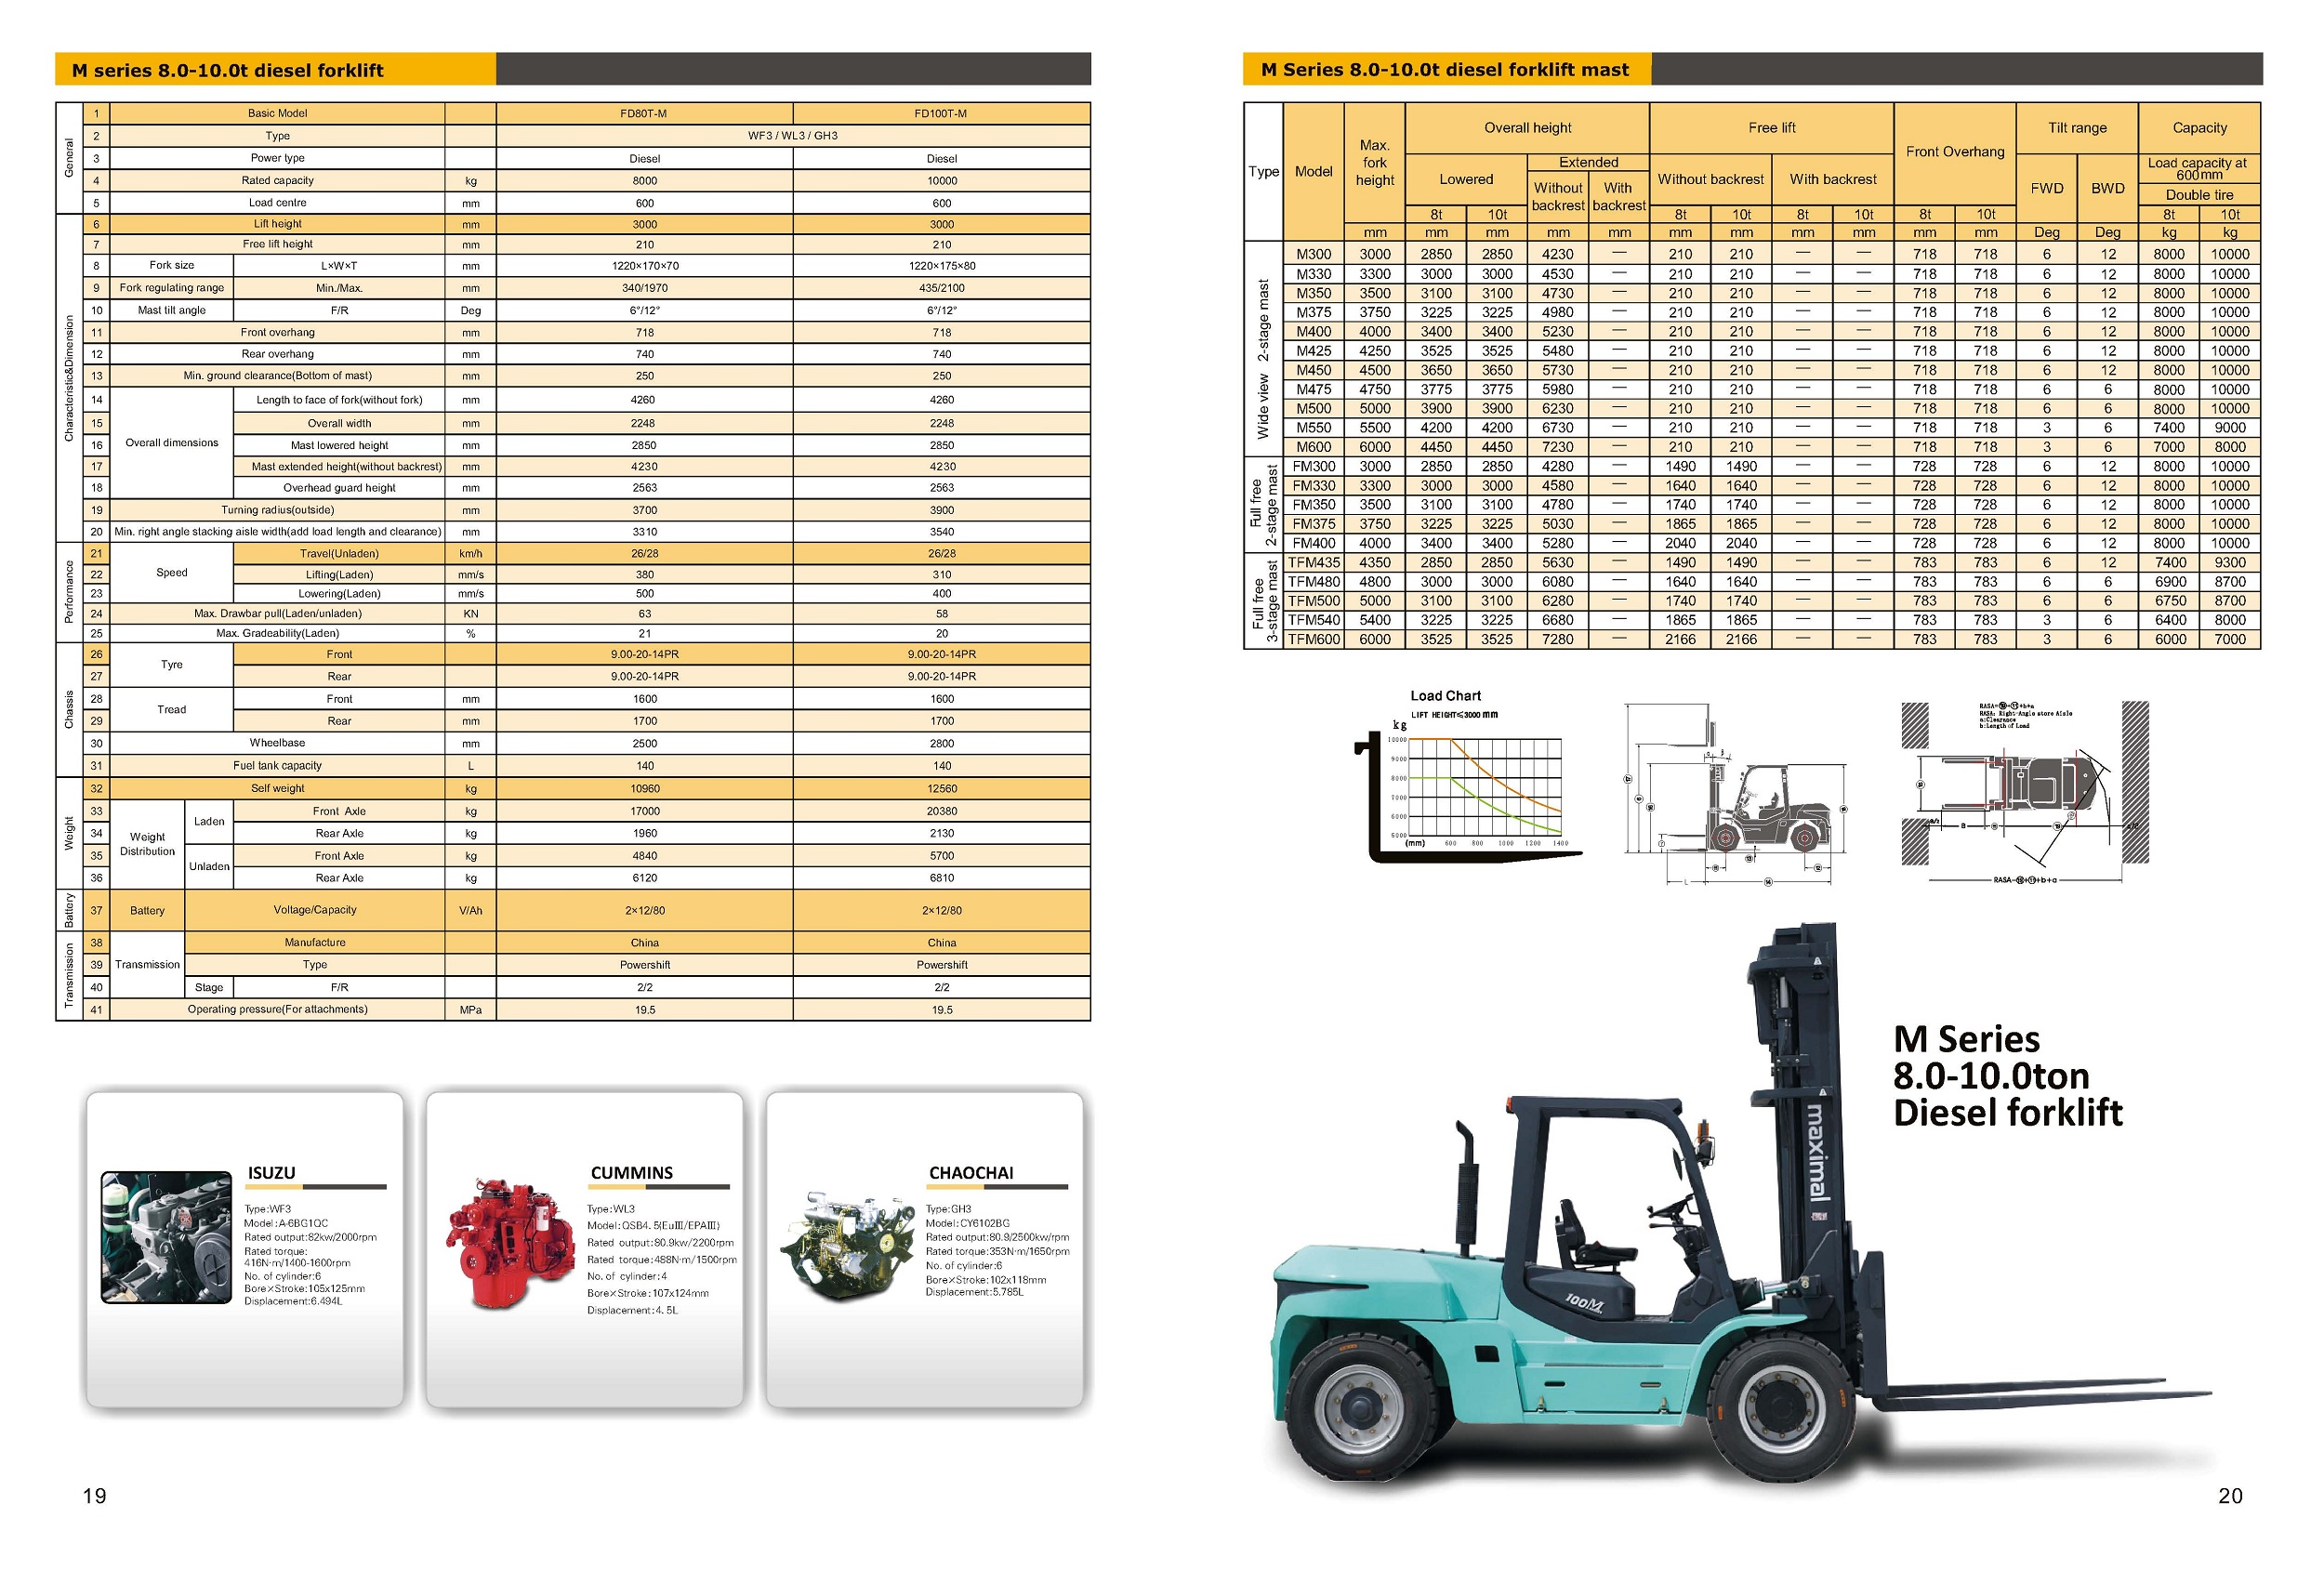 8 - 10 Tonne Maximal Diesel Forklift Specifications